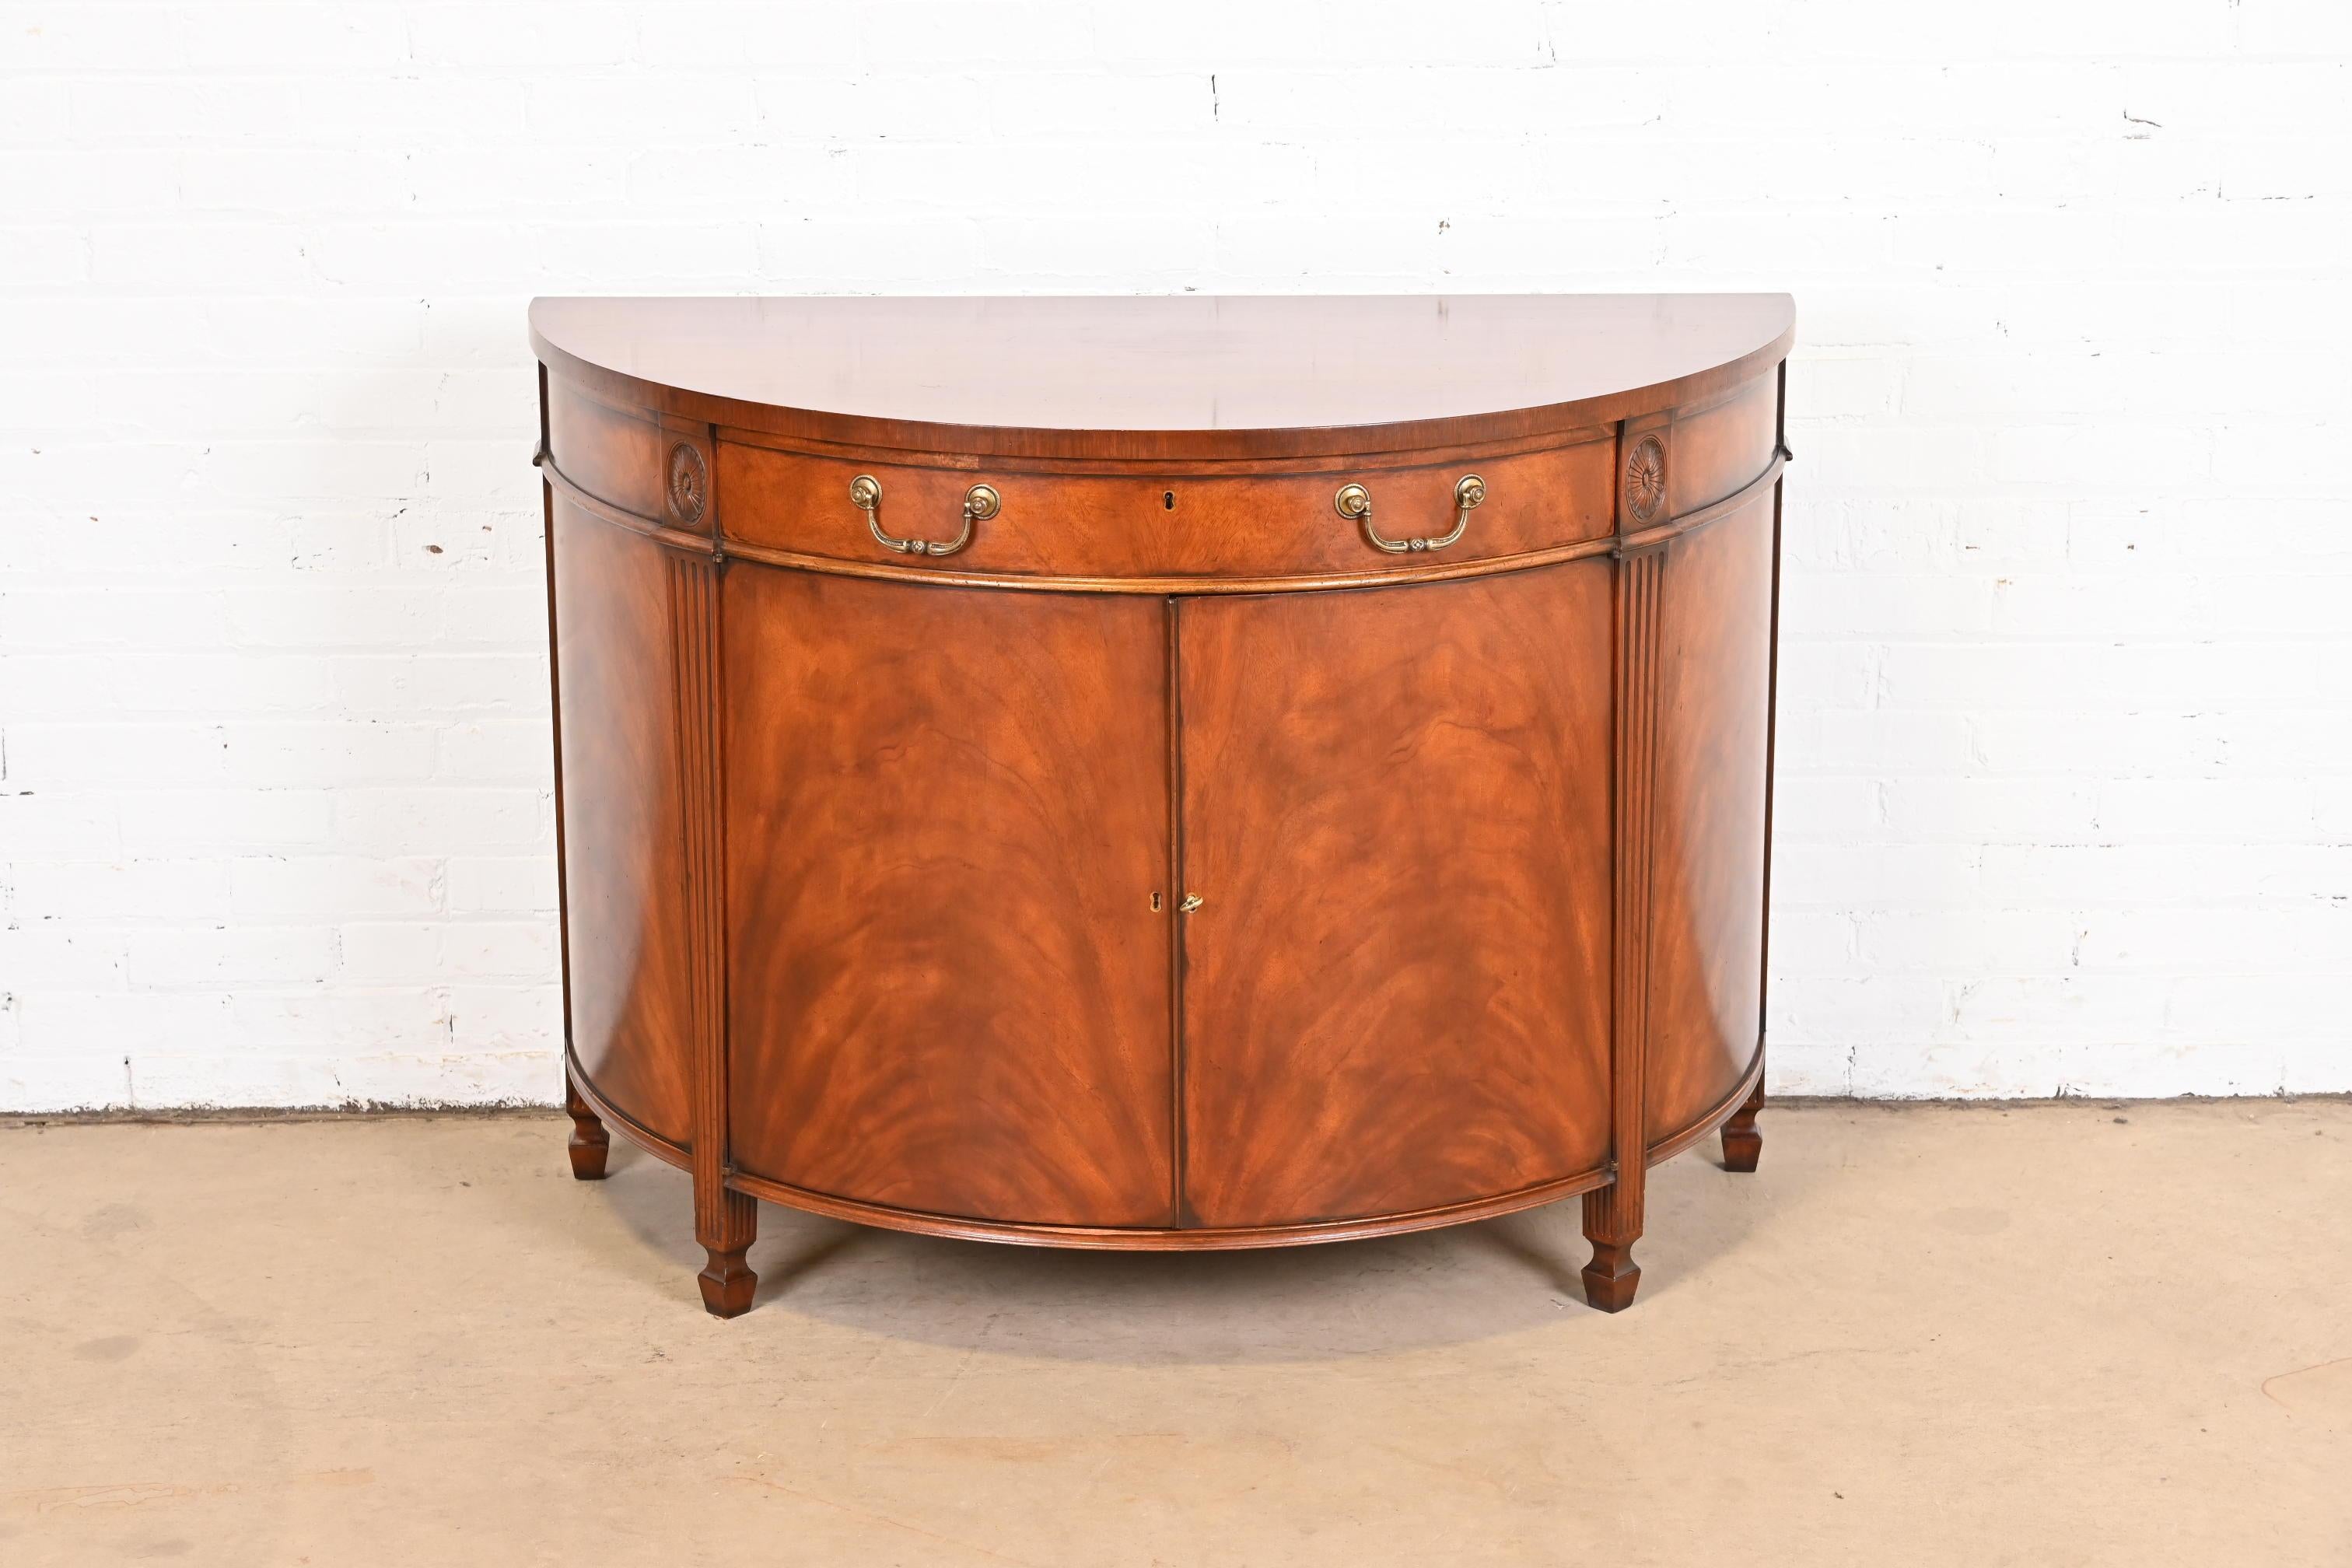 An exceptional Georgian style demilune sideboard or bar cabinet

In the manner of Baker Furniture

USA, circa 1980s

Gorgeous flame mahogany, with original brass hardware. Cabinet locks, and key is included.

Measures: 45.25